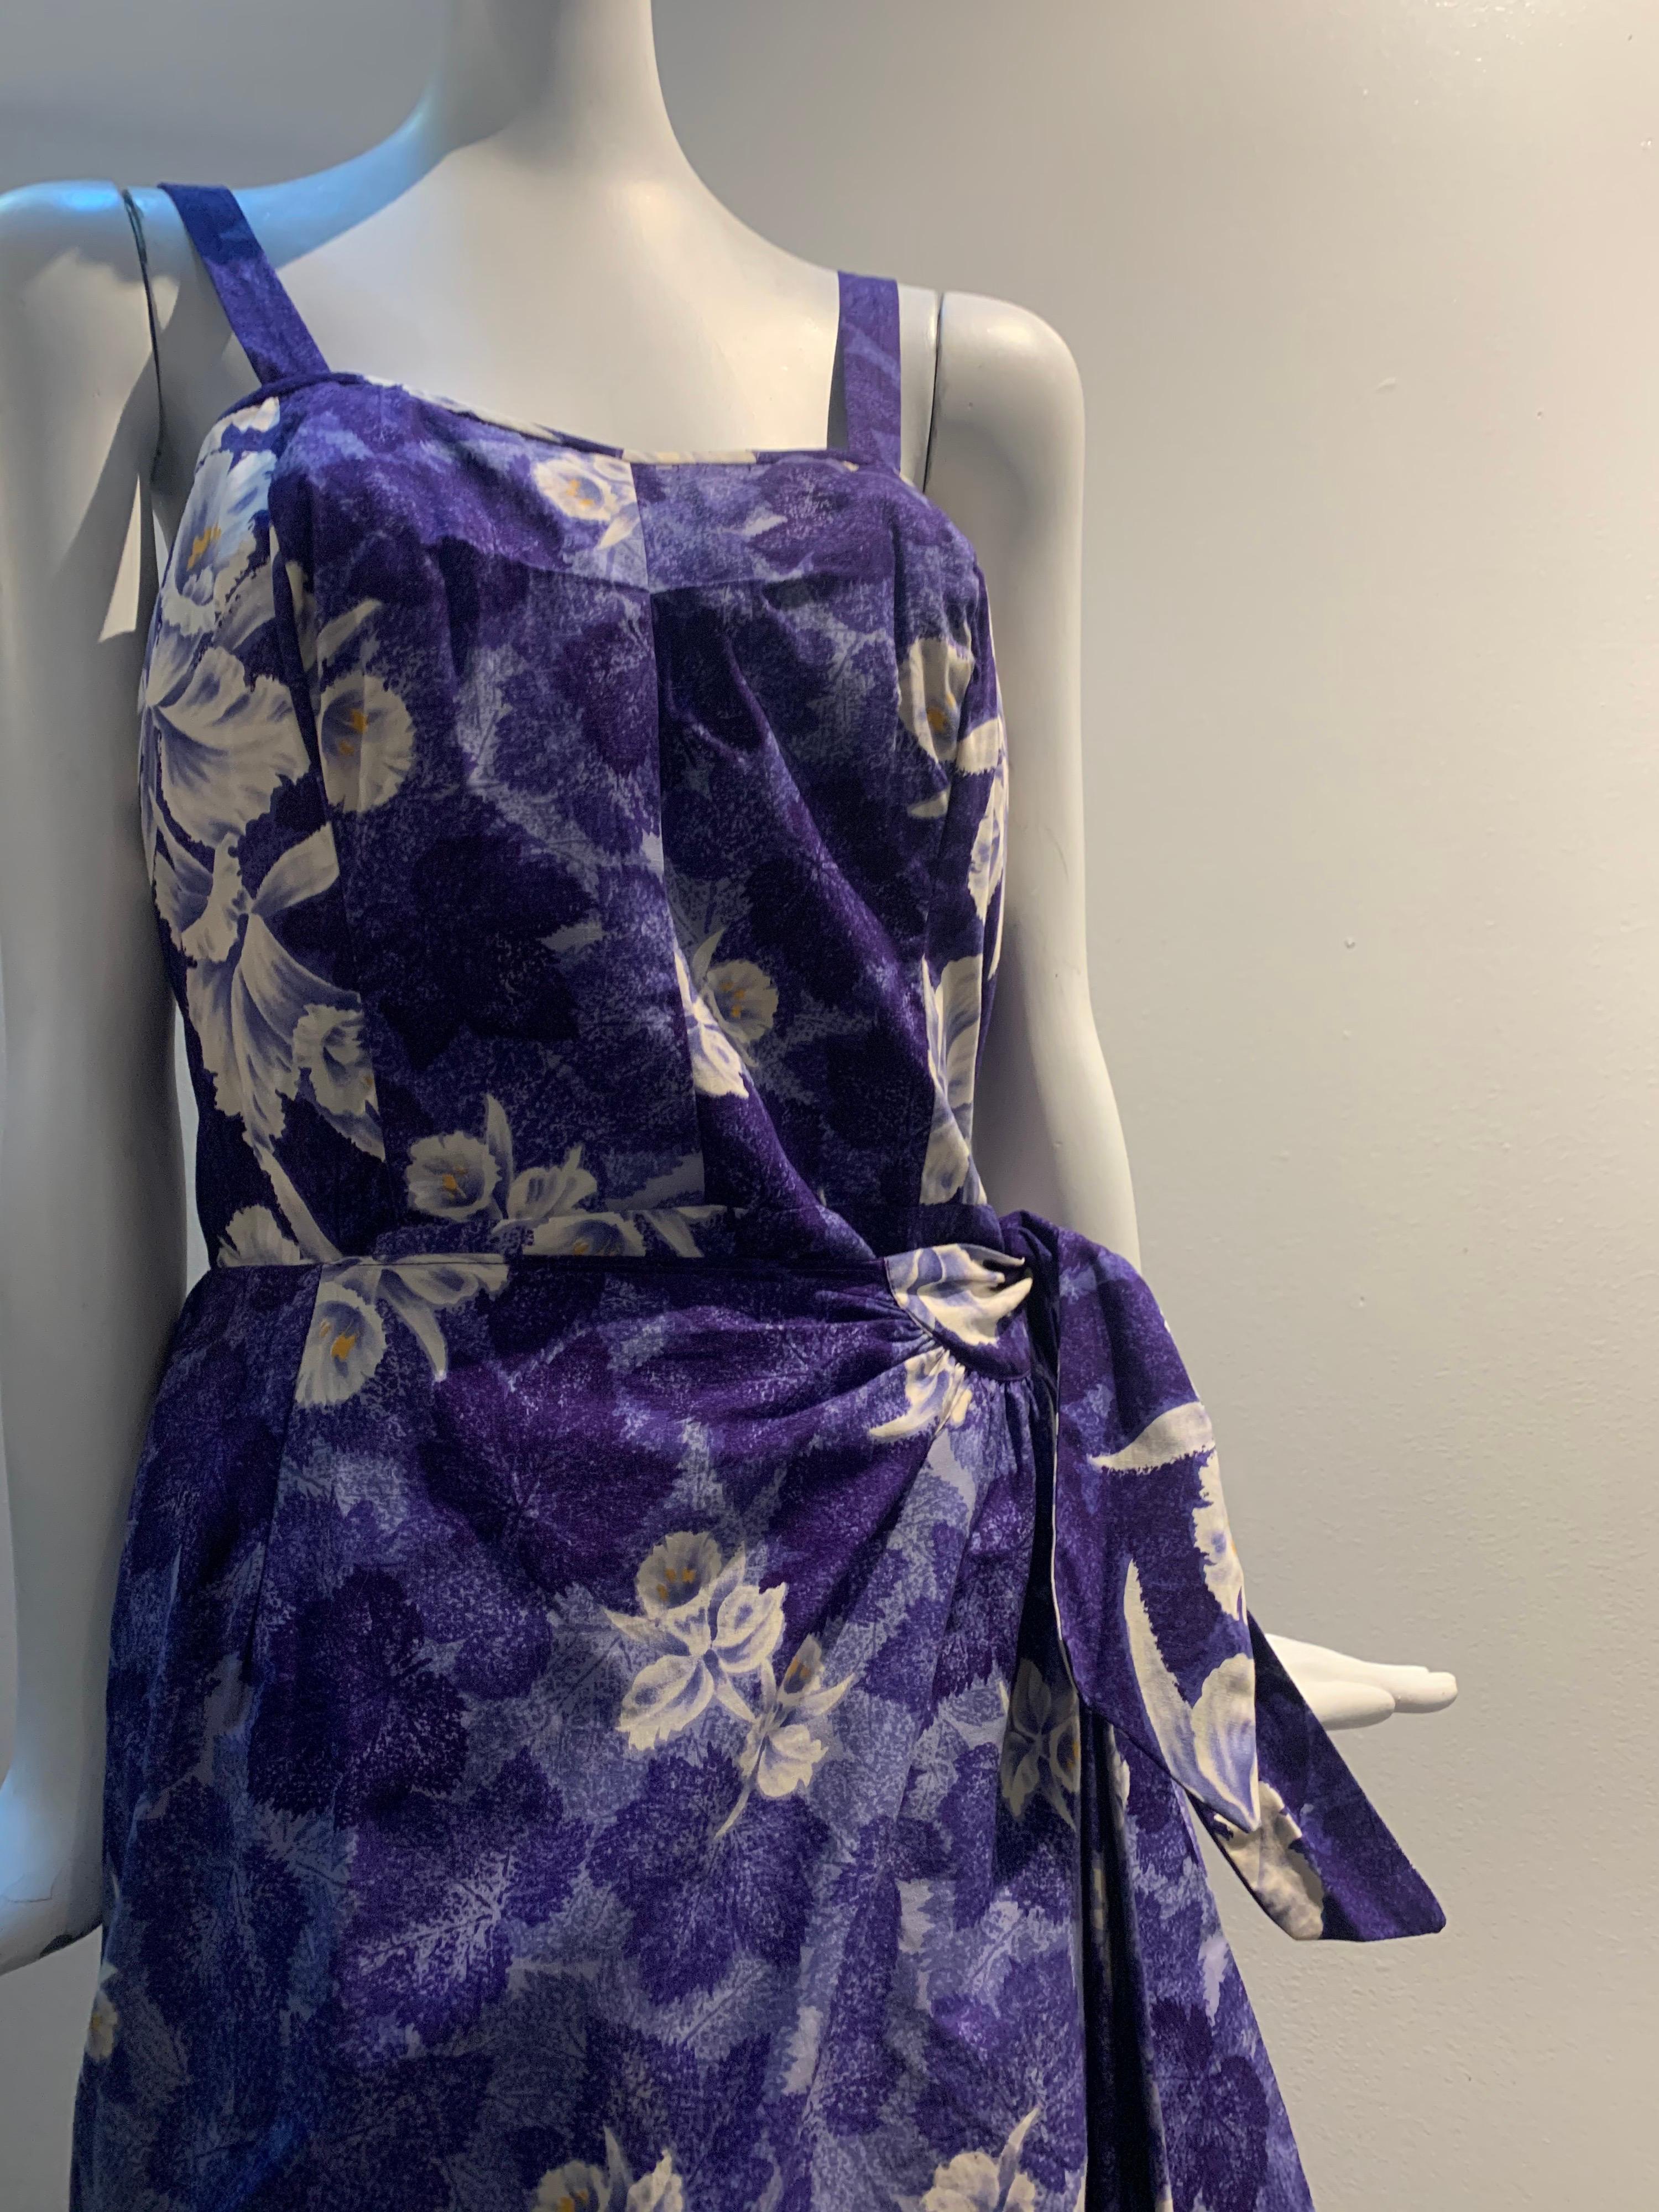 1950s Sarong-style cotton sun dress in purple tropical print with scattered white orchids. Back zipper, elasticized side panels, wrap skirt with side tie. Classic Dorothy Lamore style! Size 8.